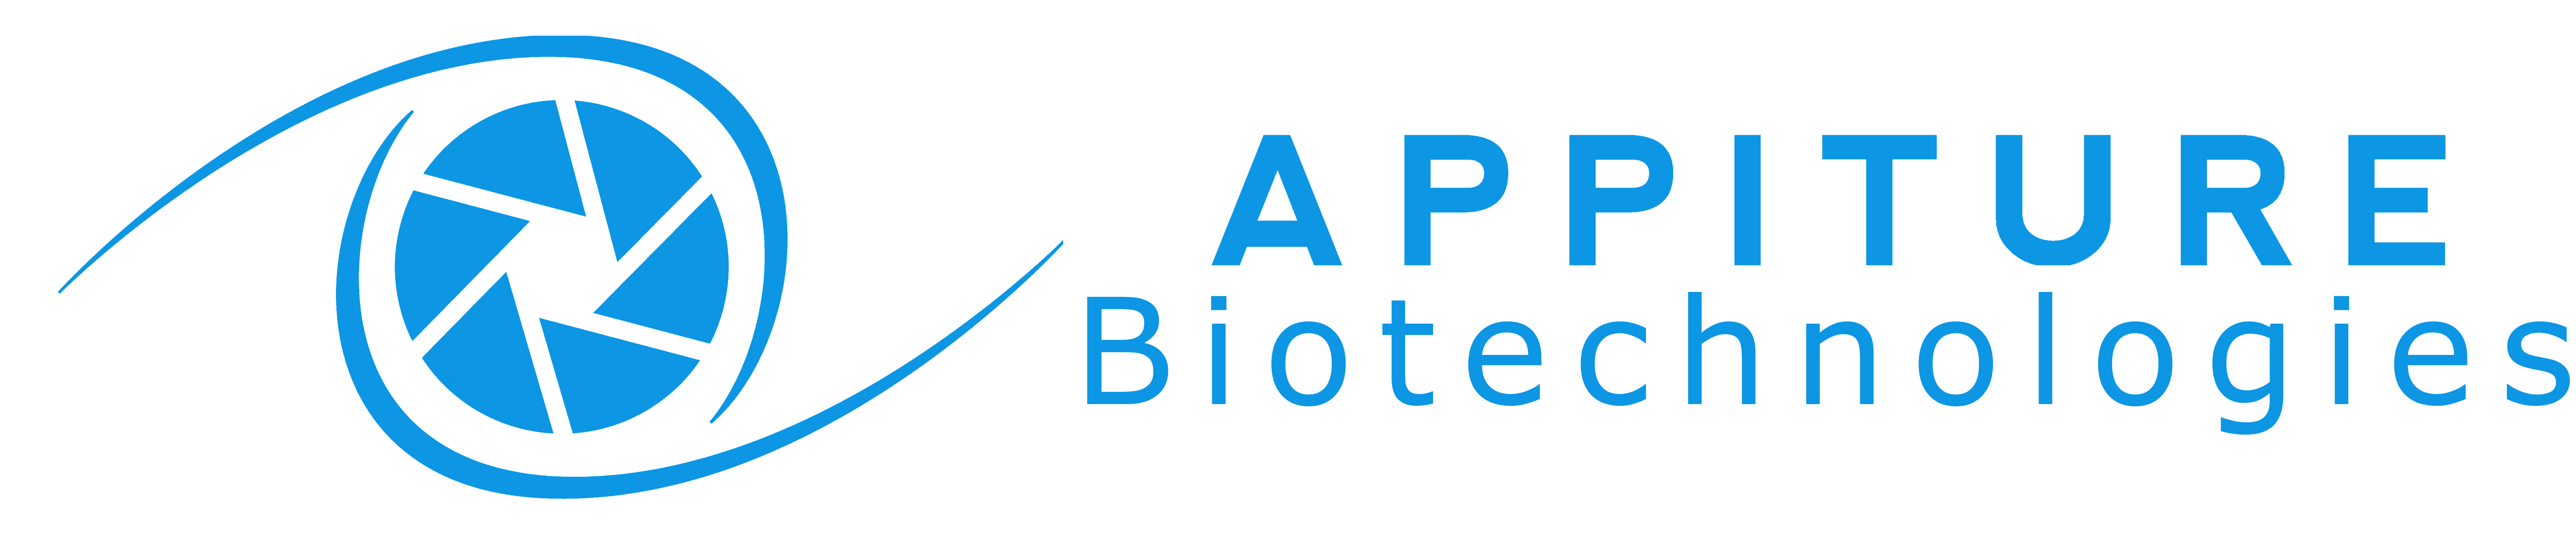 Appiture Biotechnologies